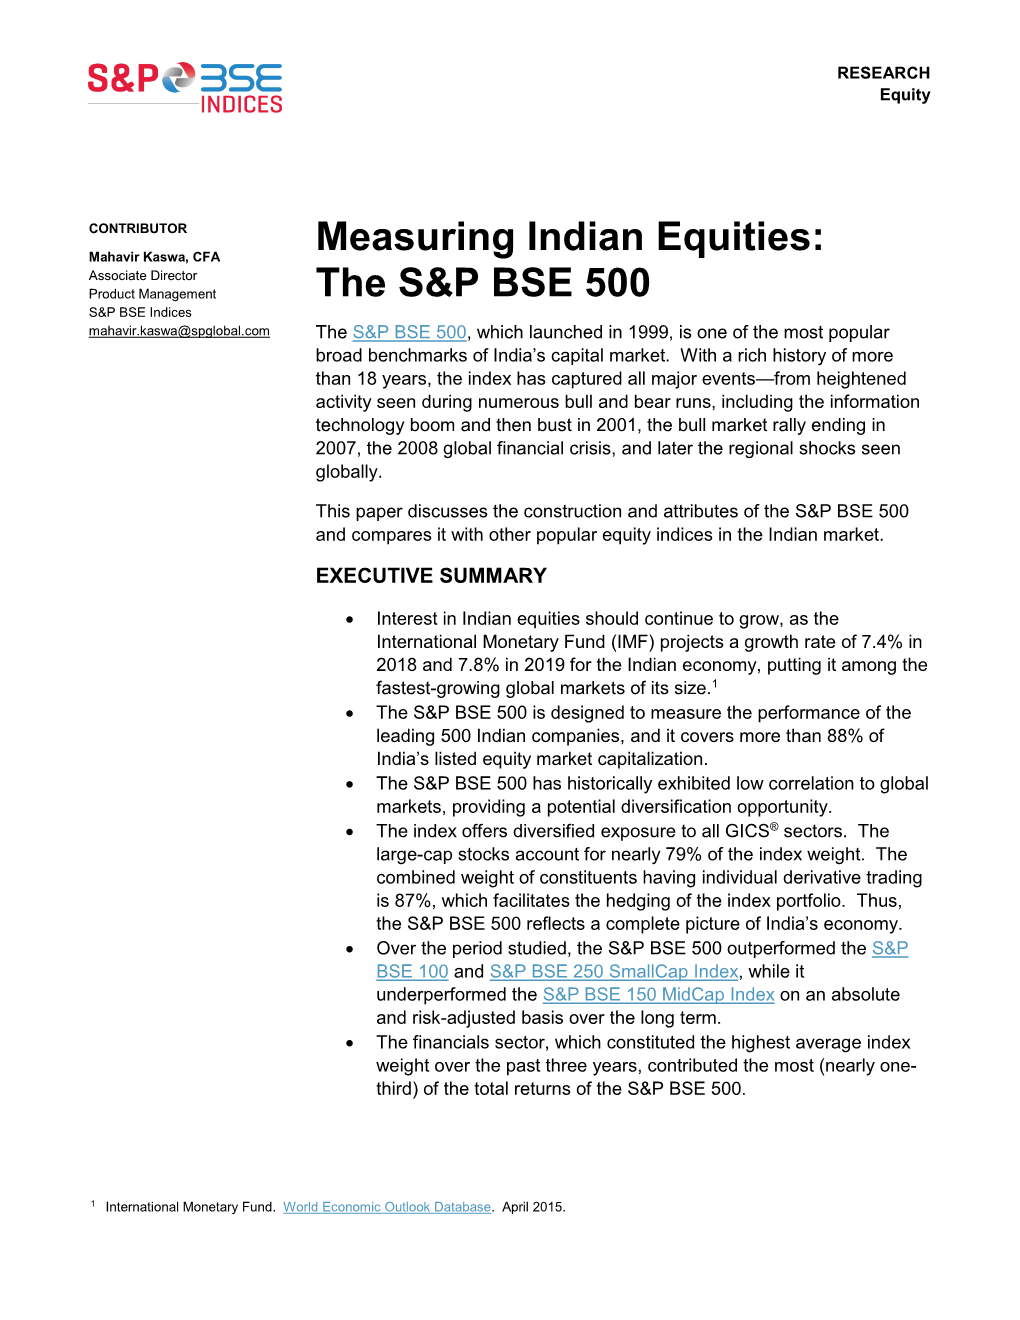 Measuring Indian Equities: the S&P BSE